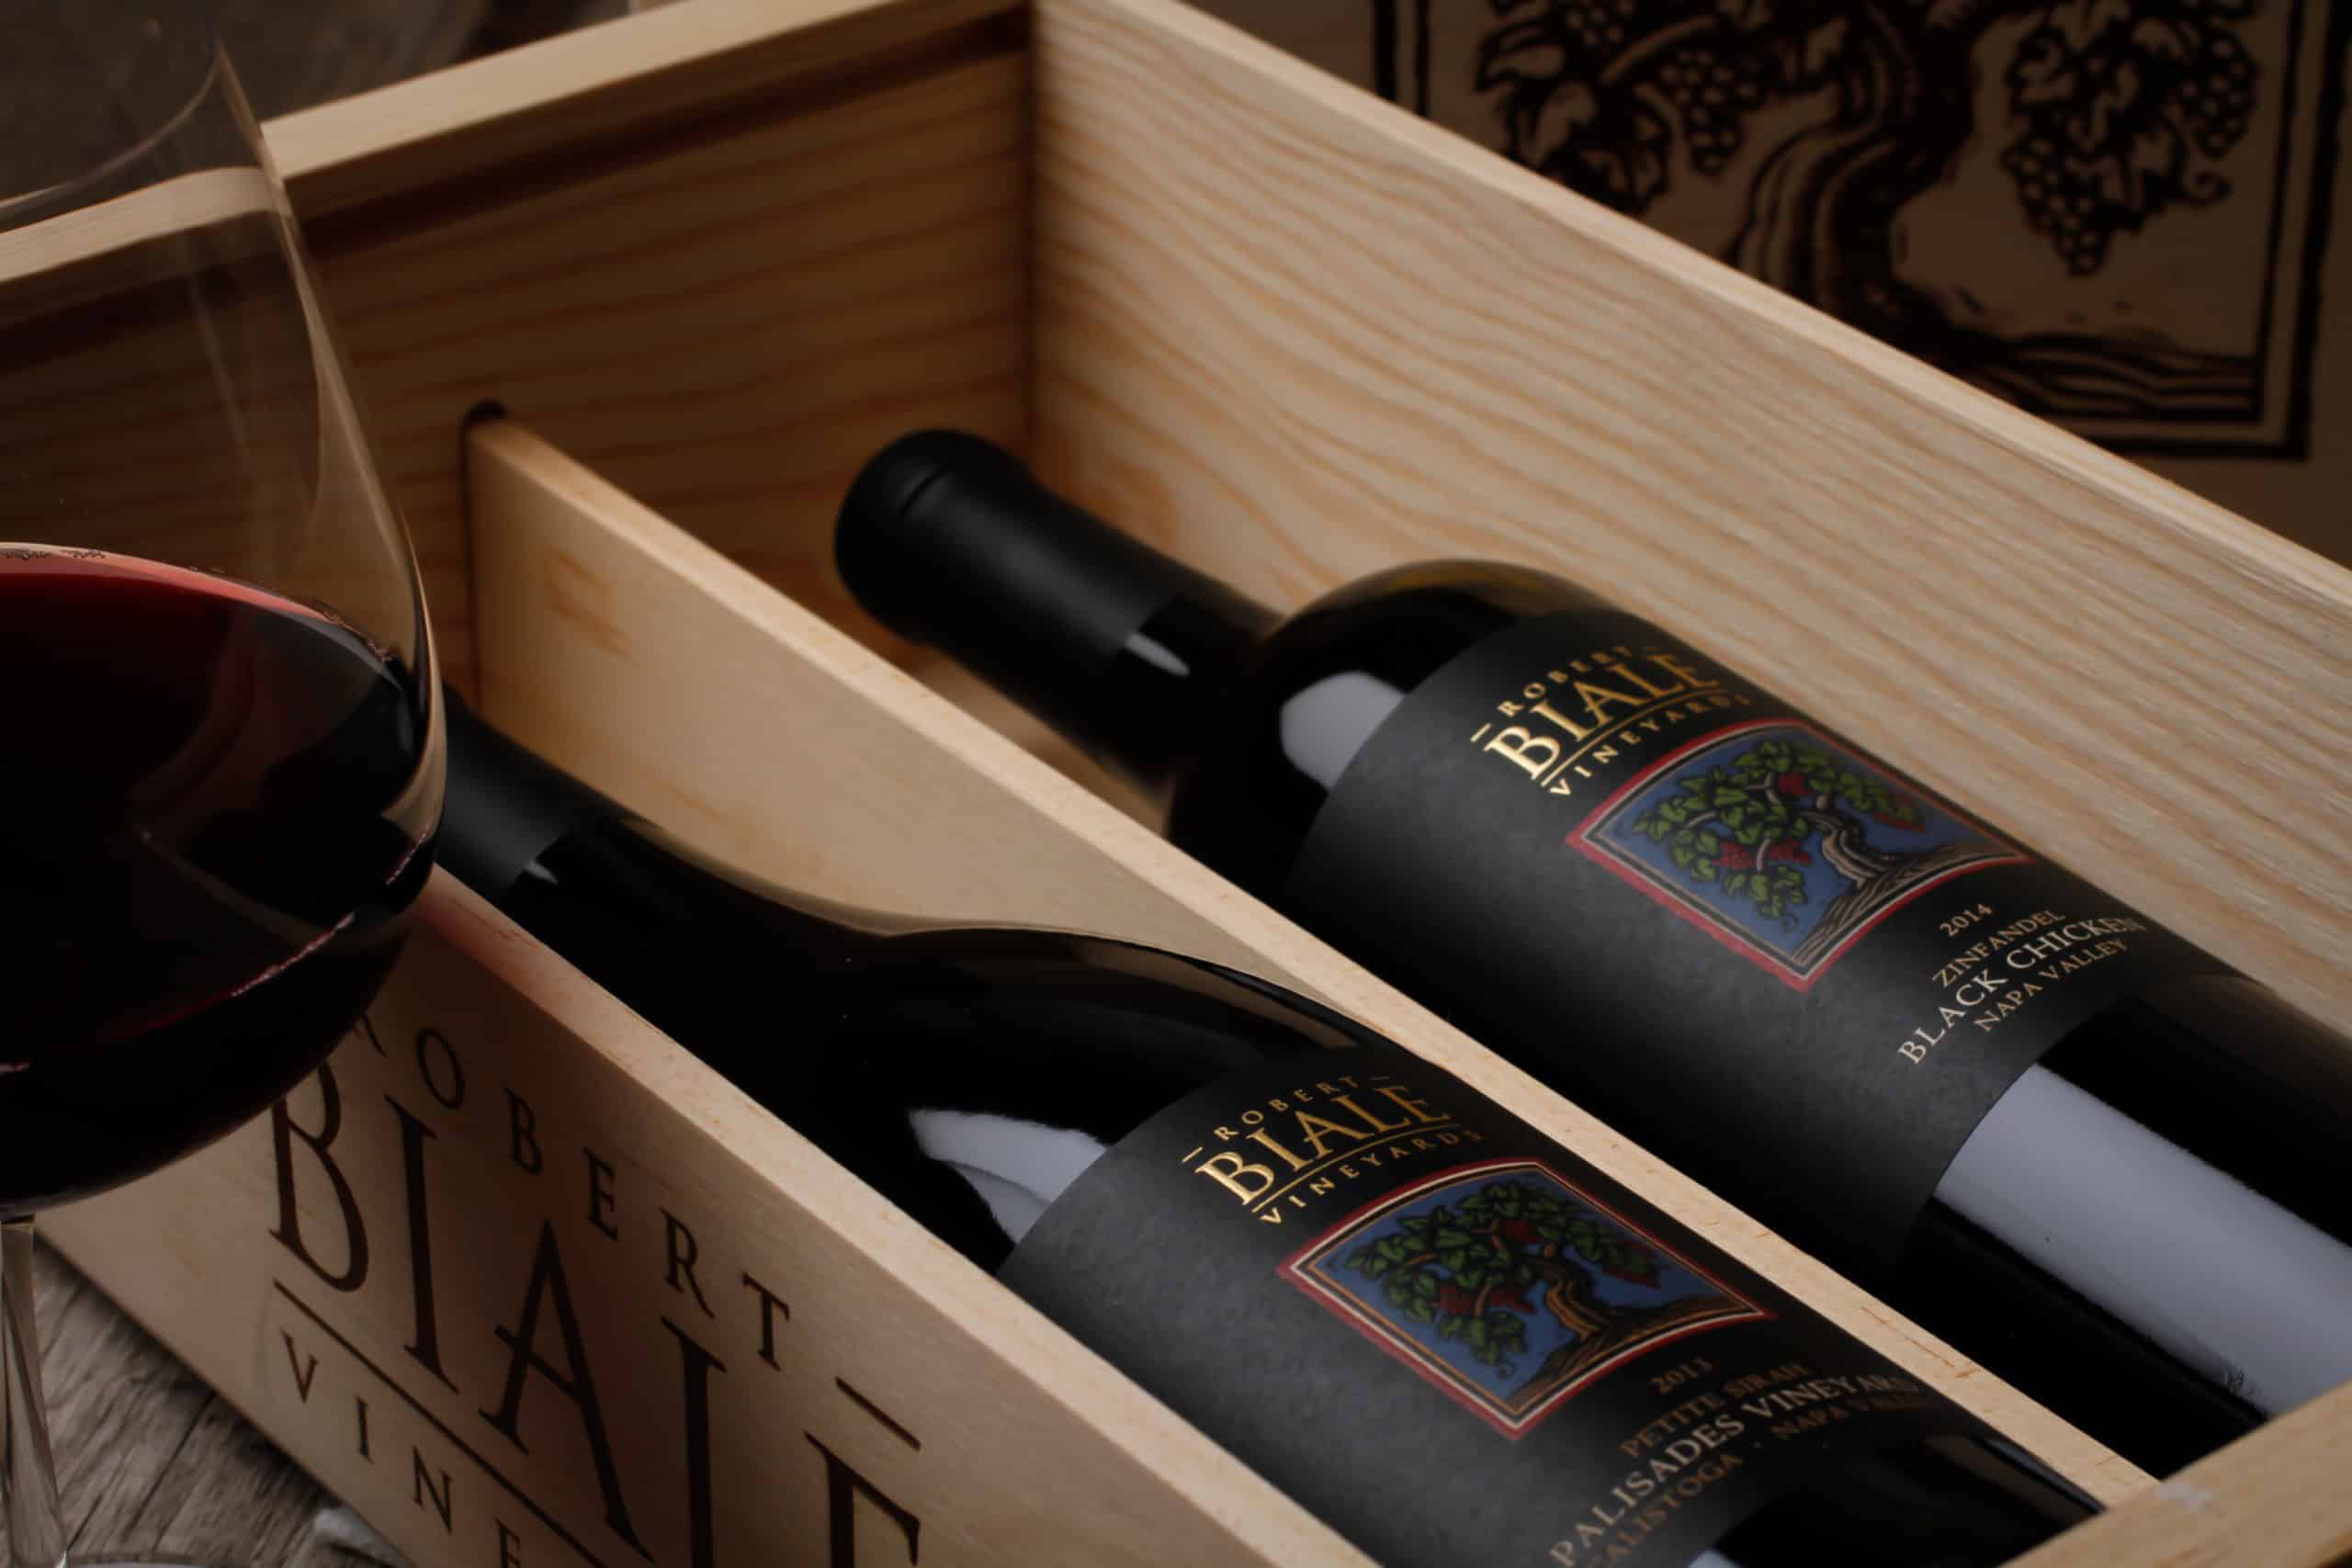 wooden wine box with Biale logo on it with two bottles of Biale wine inside